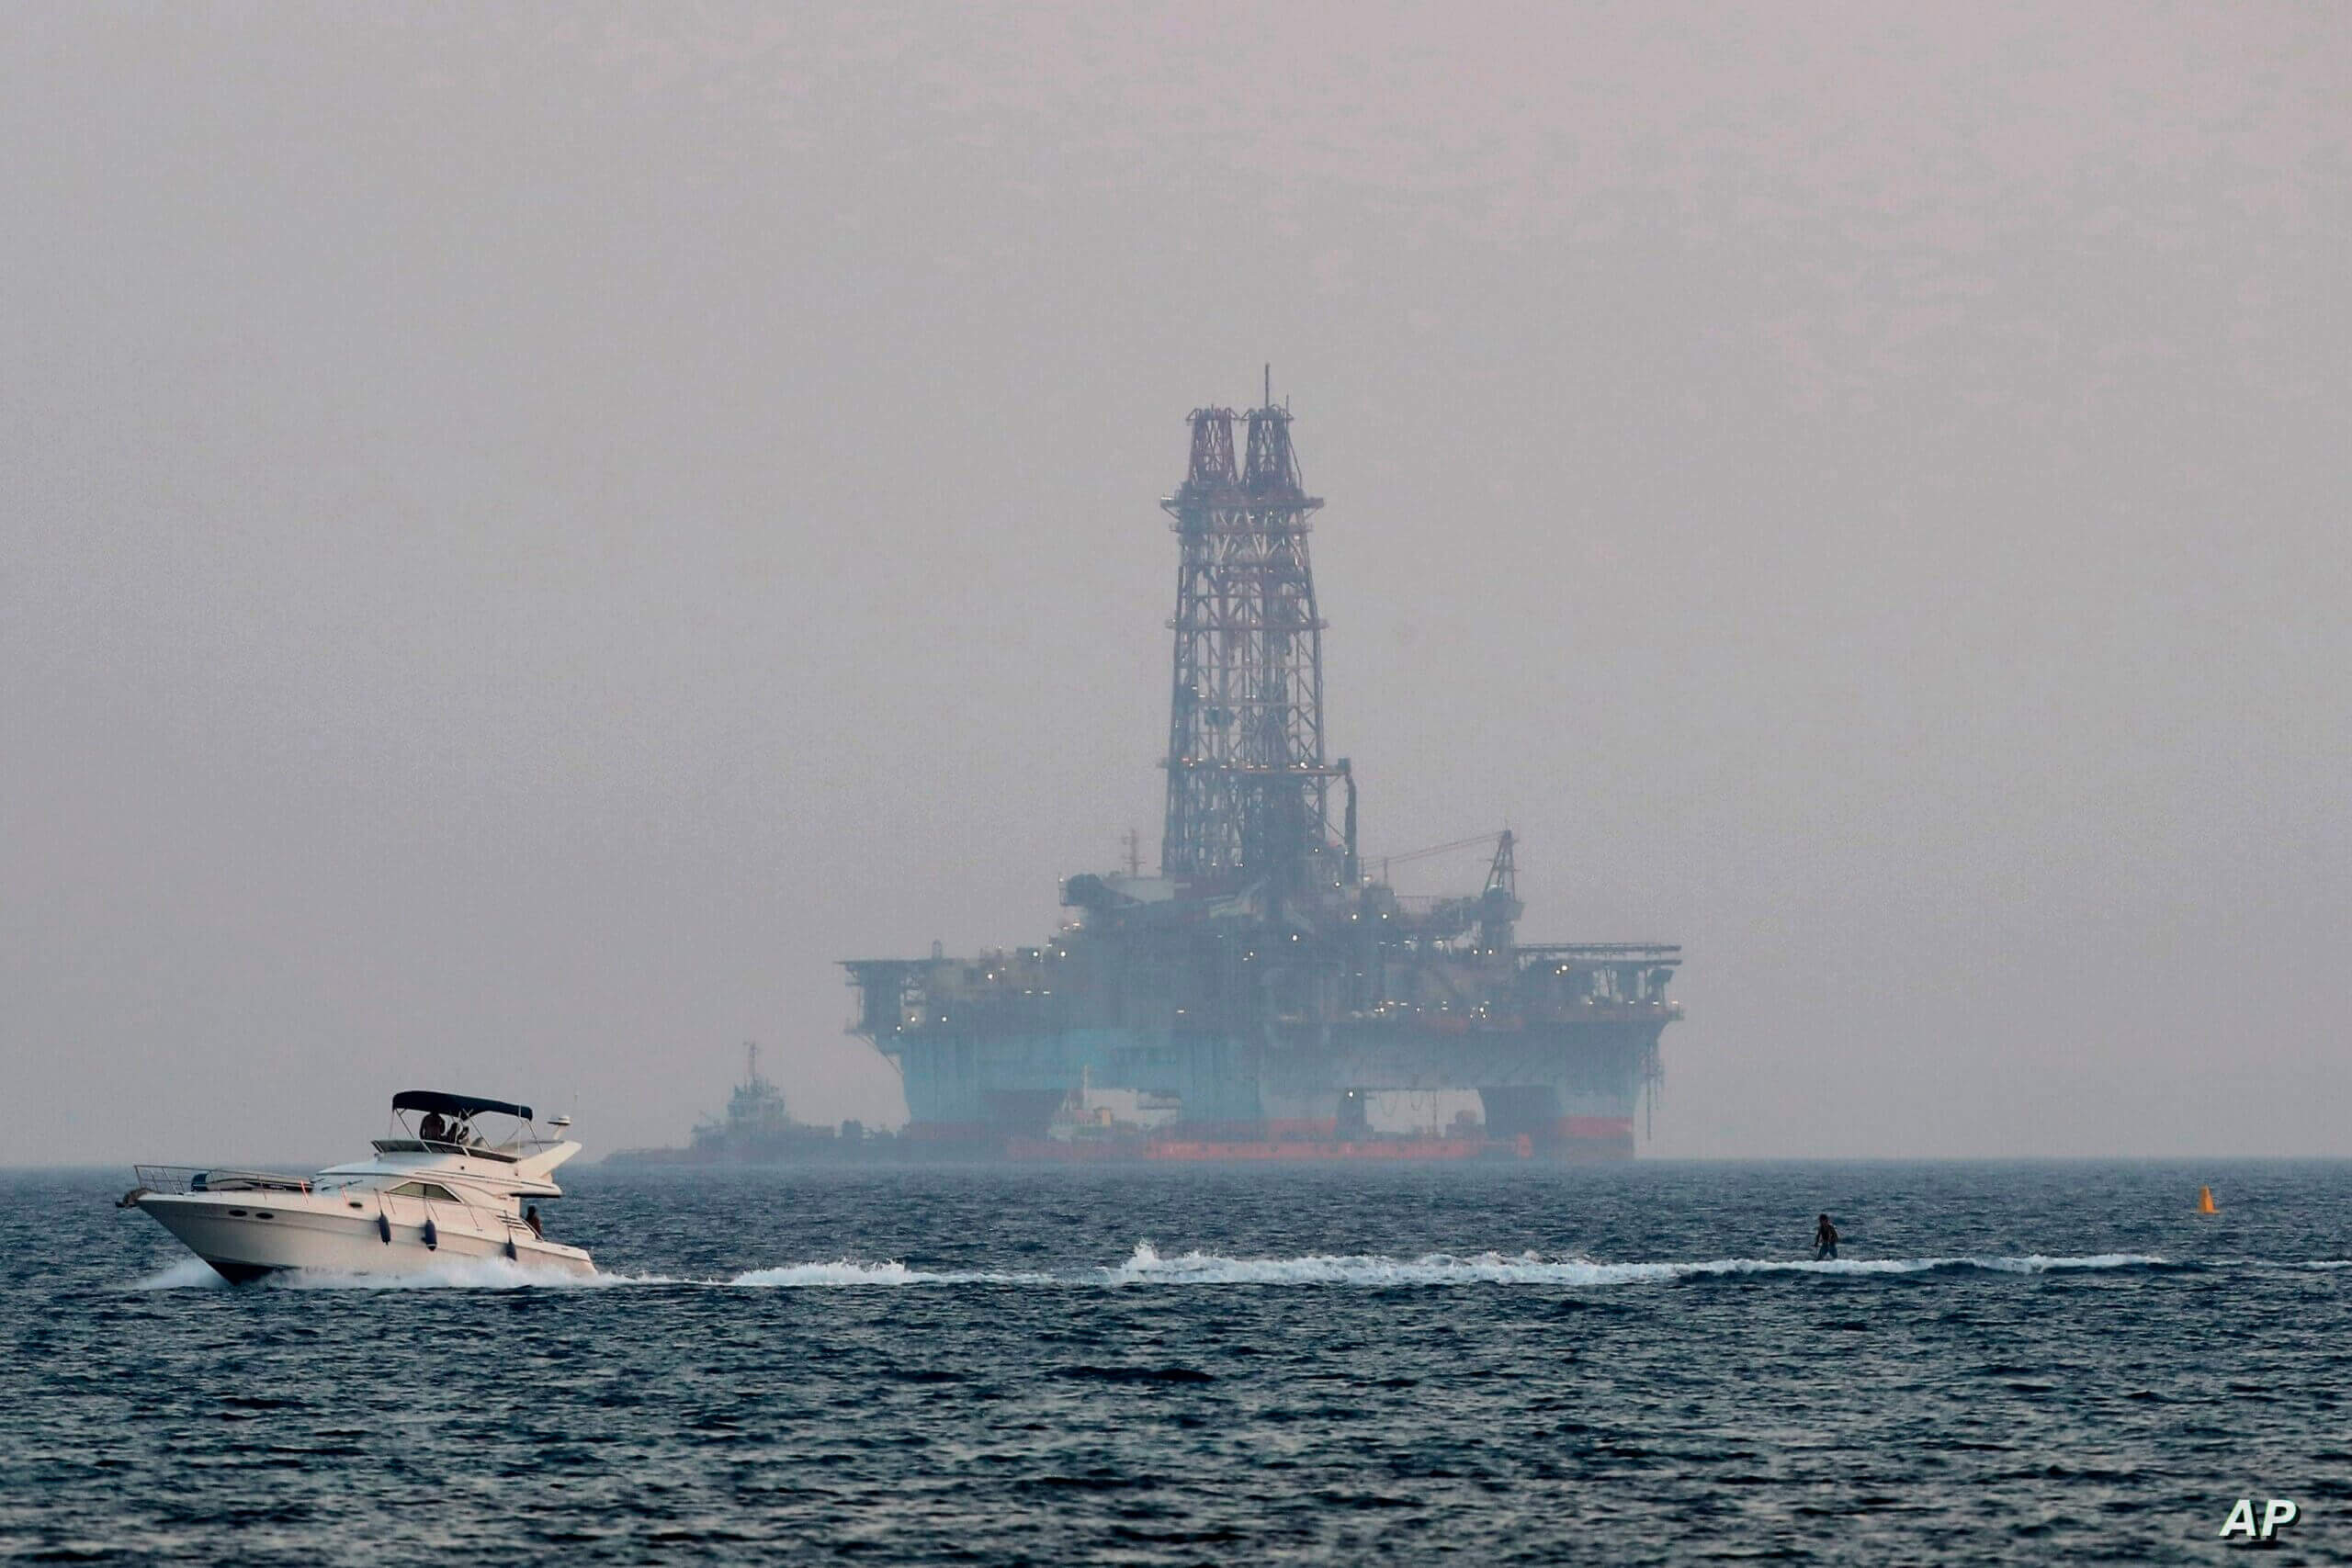 Israel achieves a "long-awaited goal" with the export of gas to Europe